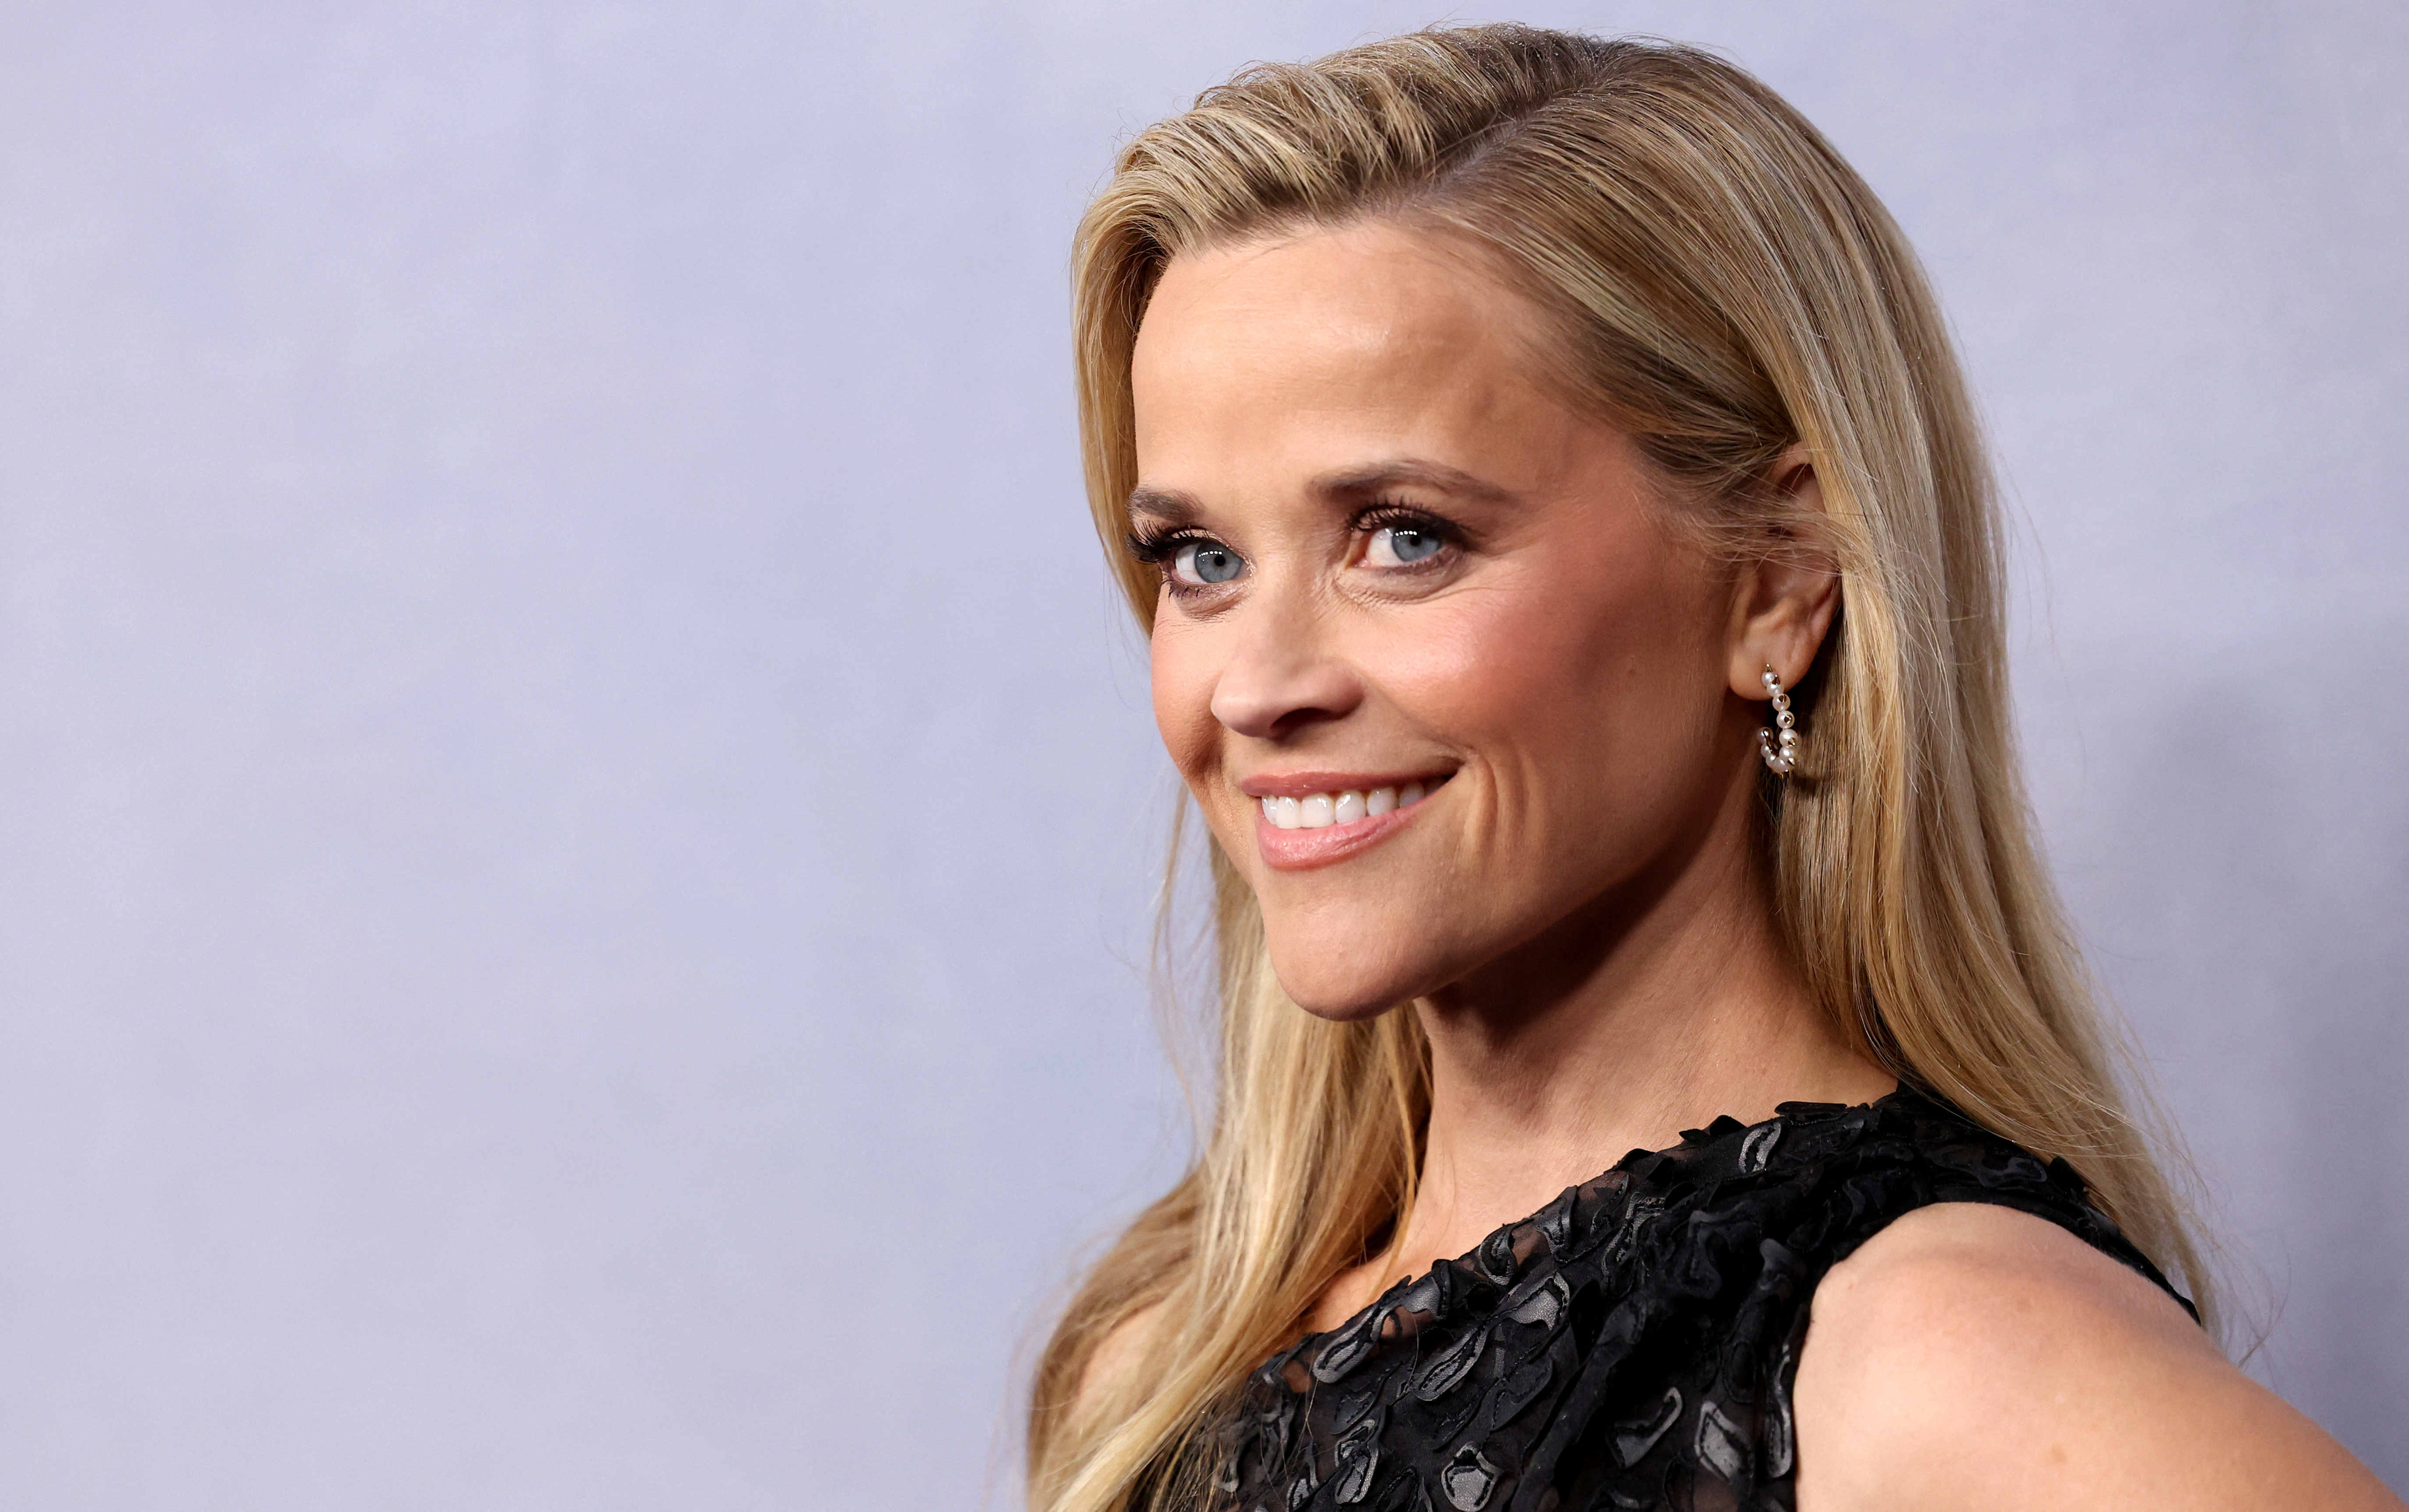 Reese Witherspoon's Brand Draper James Is Having a Huge Sale